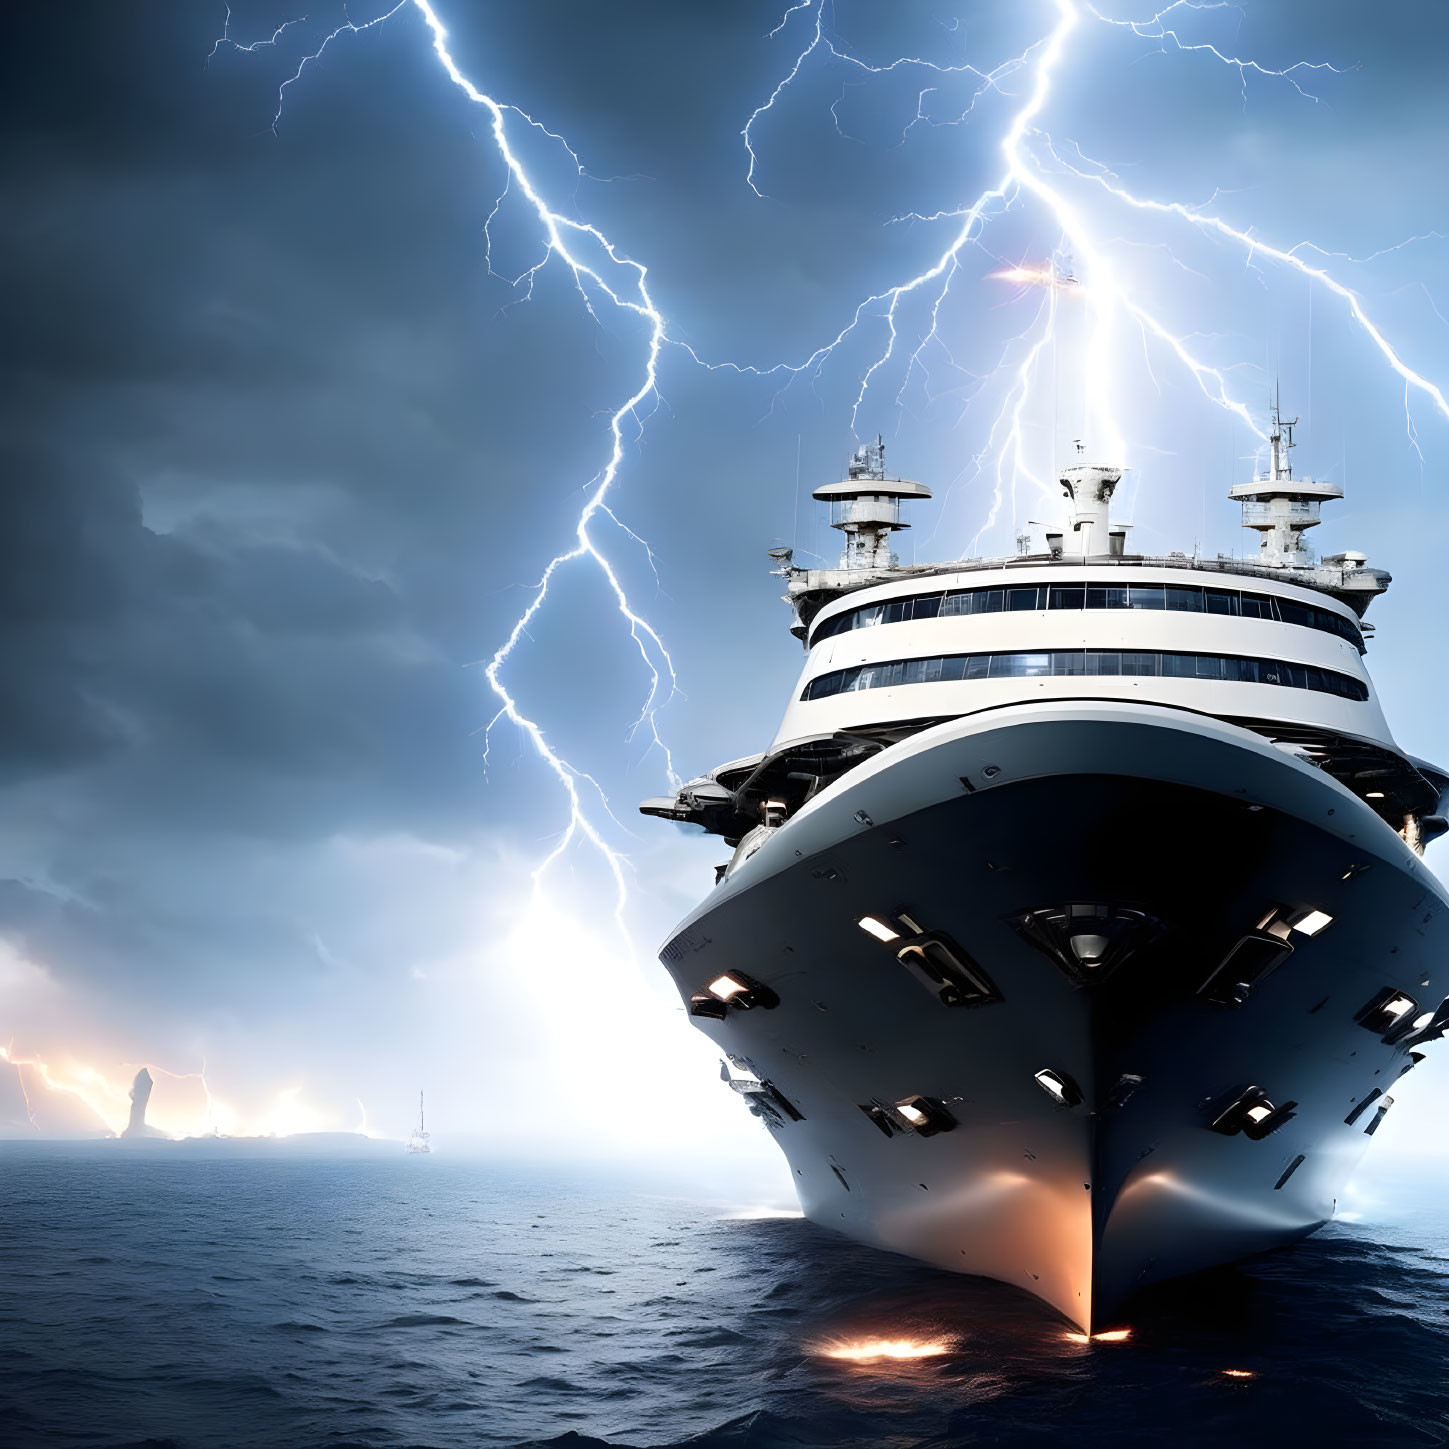 Dramatic thunderstorm with lightning strikes over cruise ship